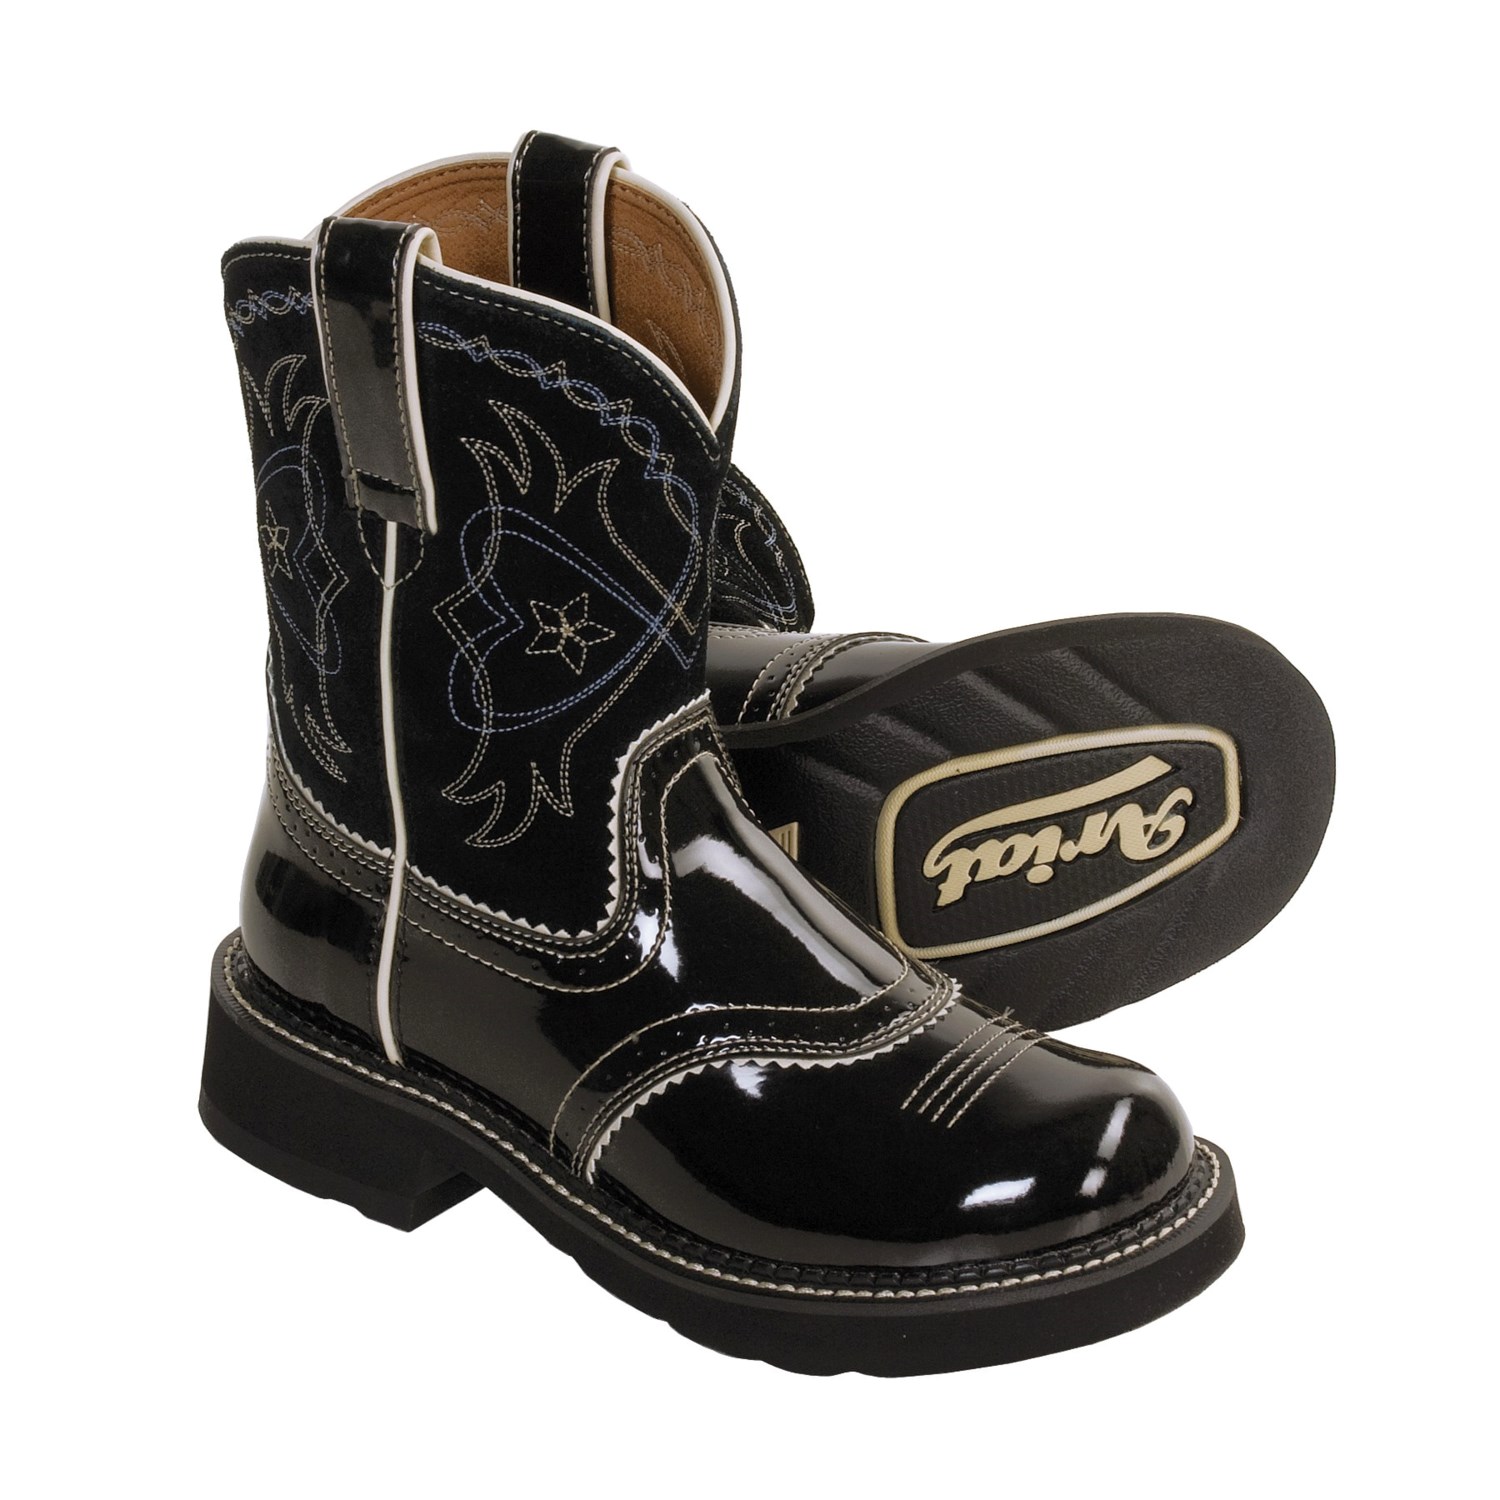 Ariat Fatbaby Boots Clearance - Cr Boot